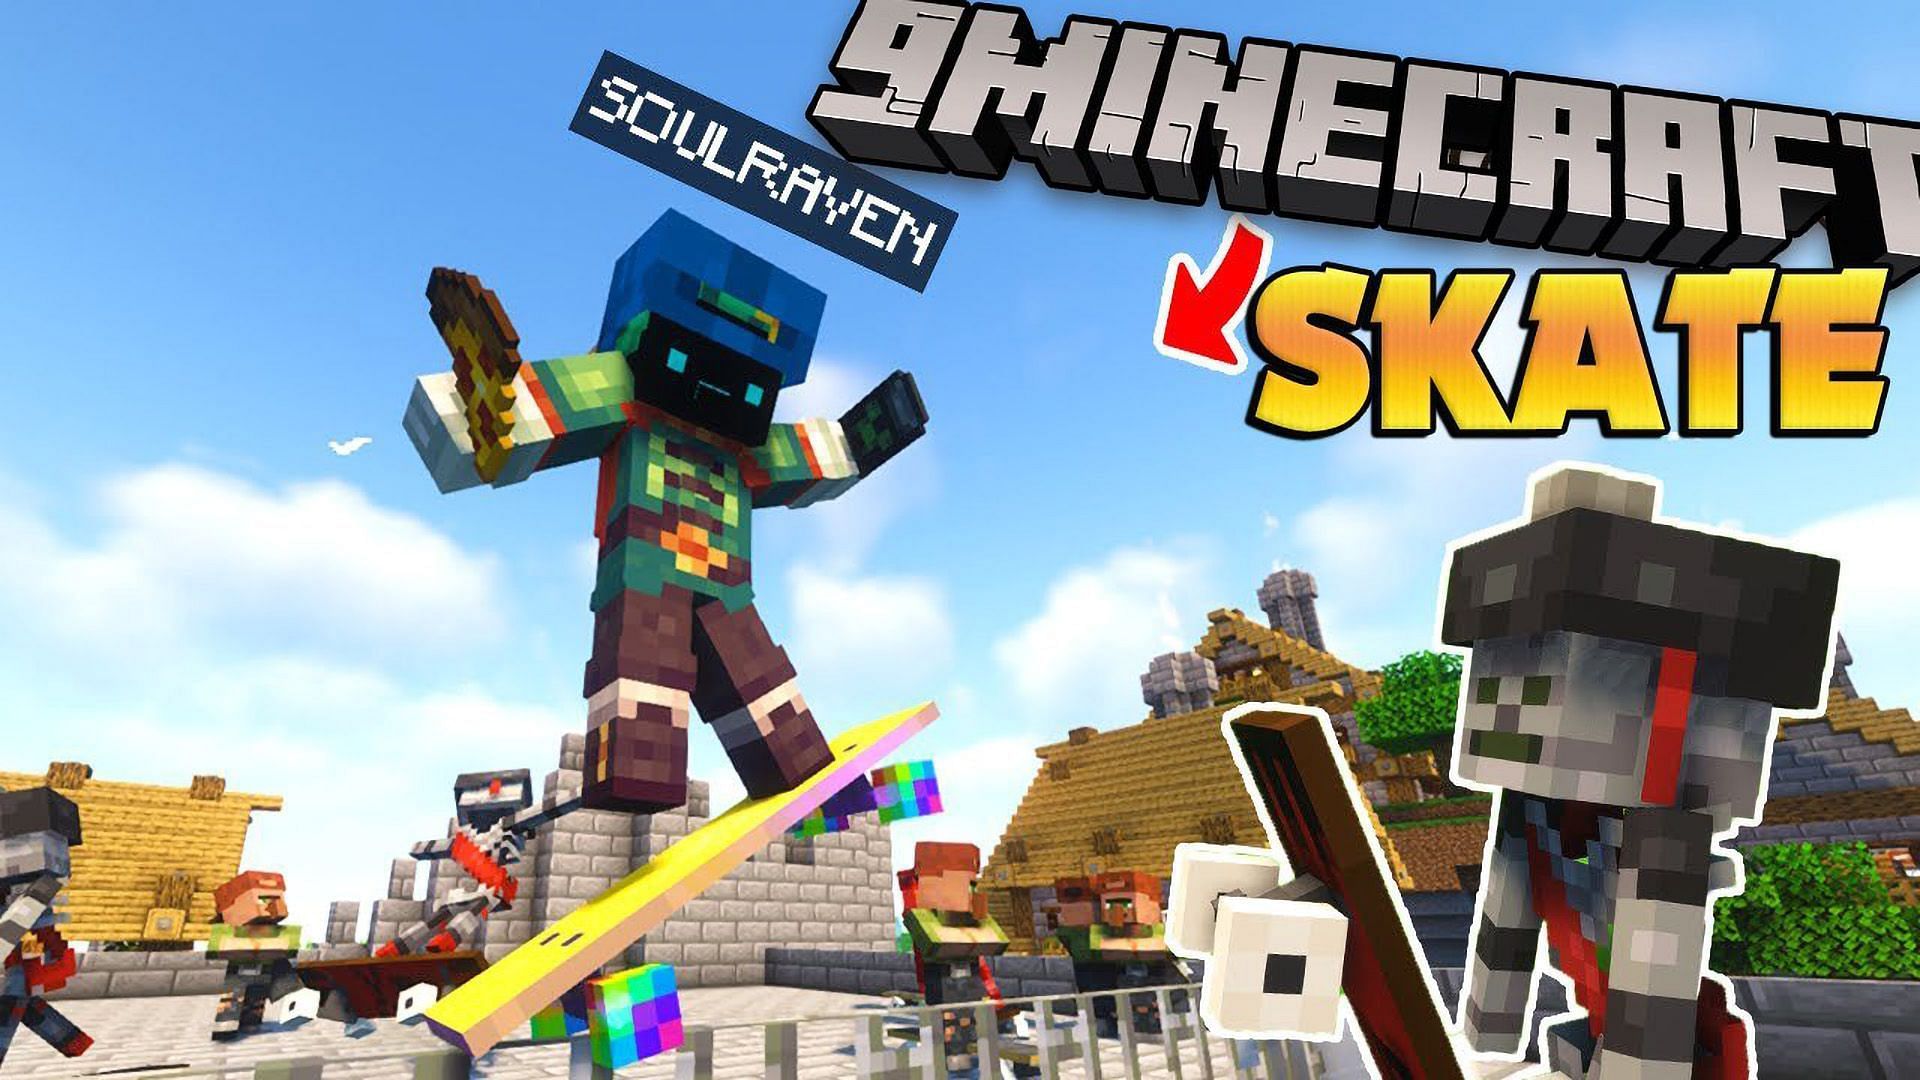 Bring skating to the streets of Minecraft (Image via 9minecraft.net)